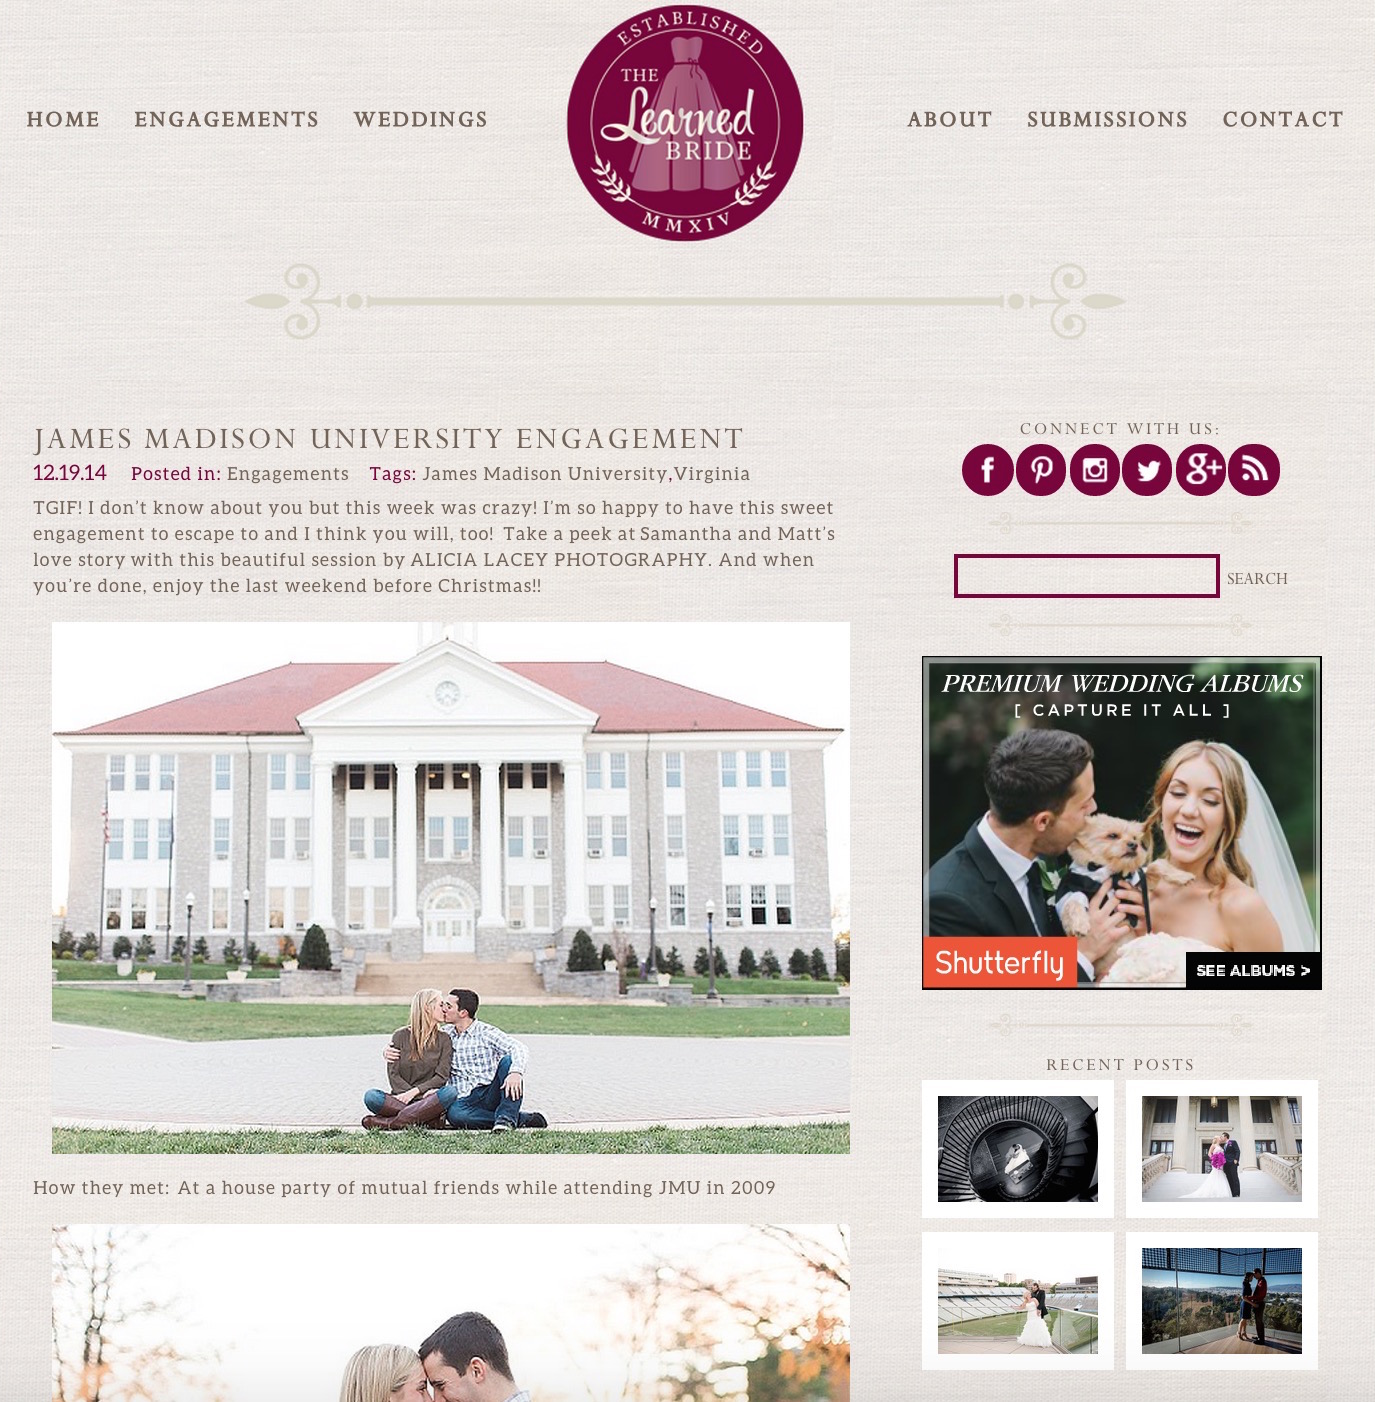 A James Madison University engagement featured on The Learned Bride.